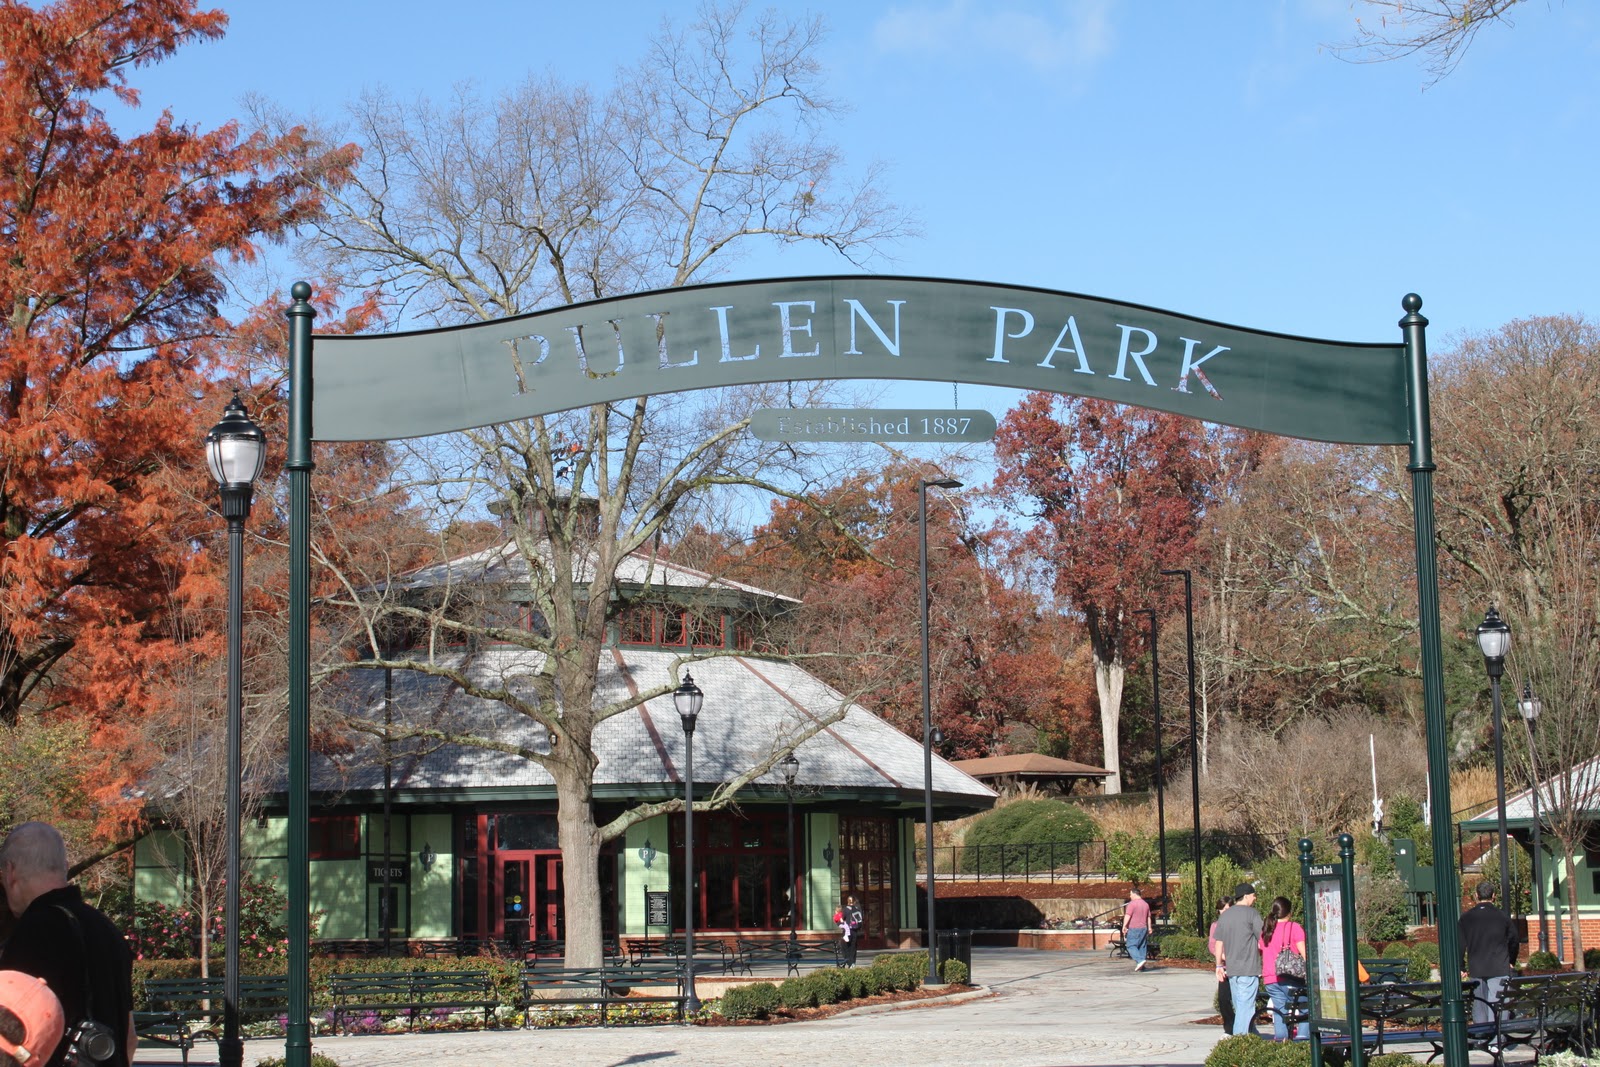 Pullen Park & Amusements - A Guide for Parents in the Triangle Region